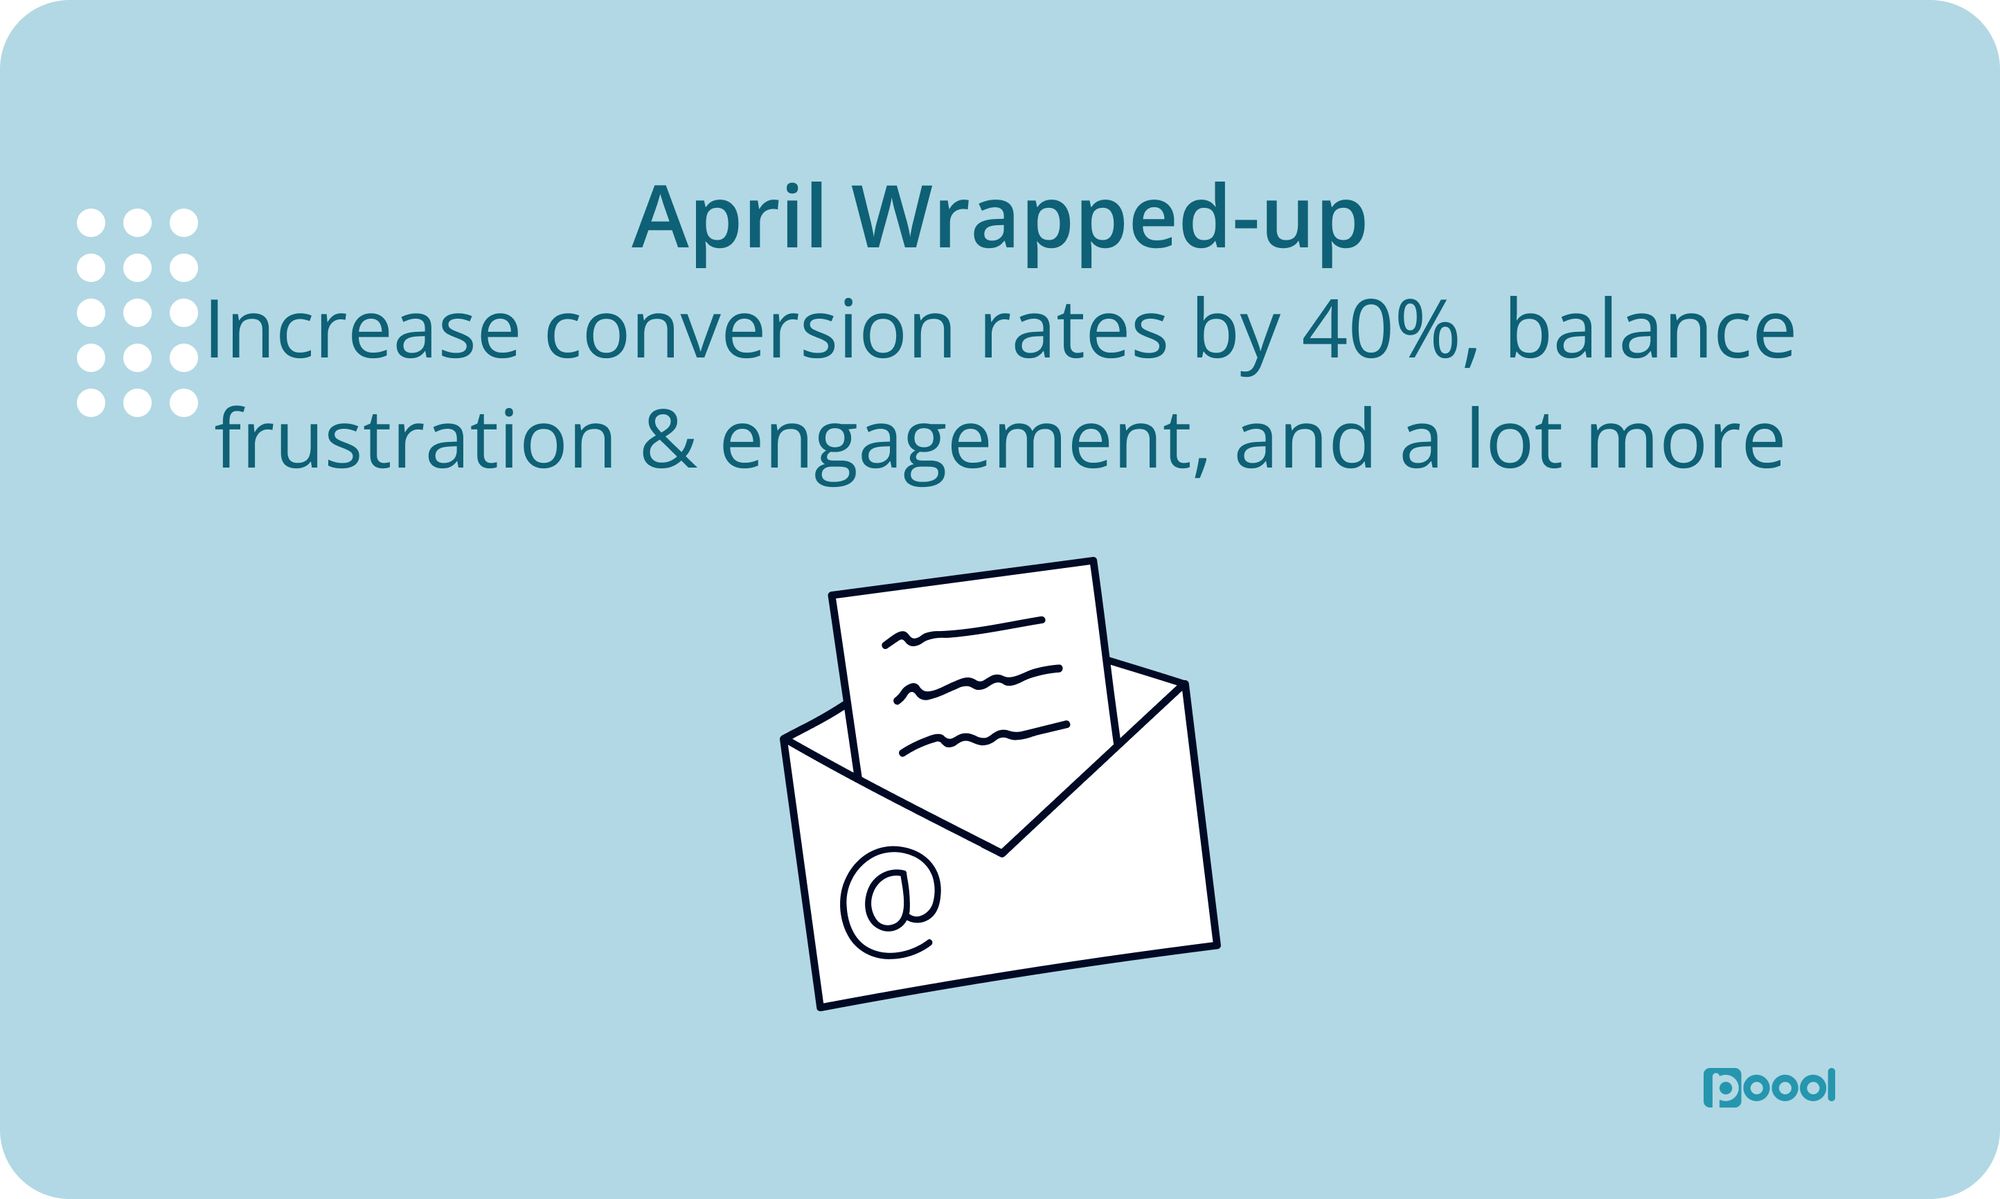 April Wrapped-up